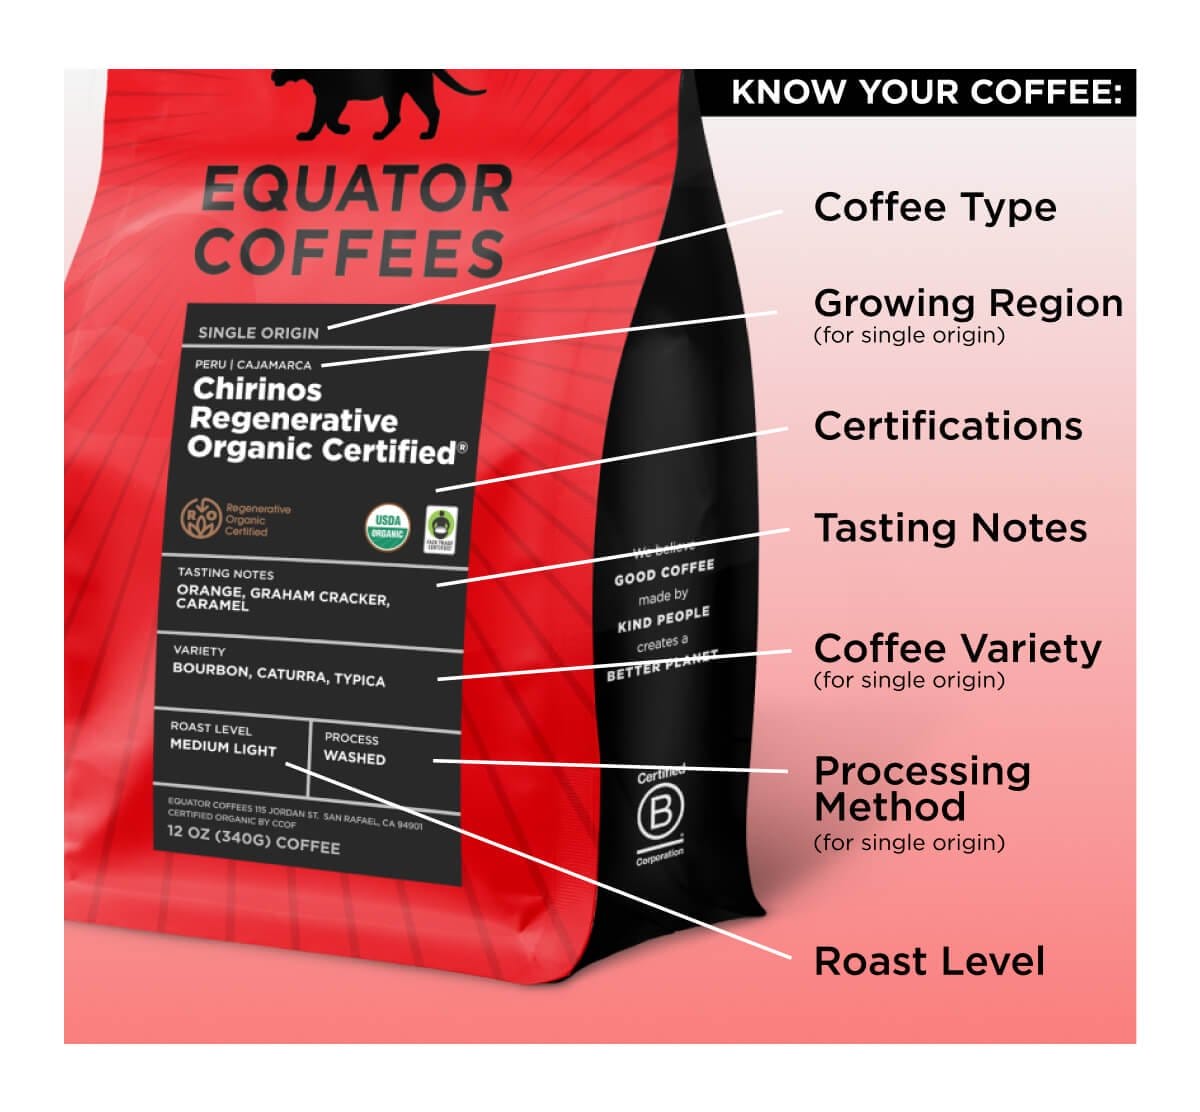 Know your coffee: